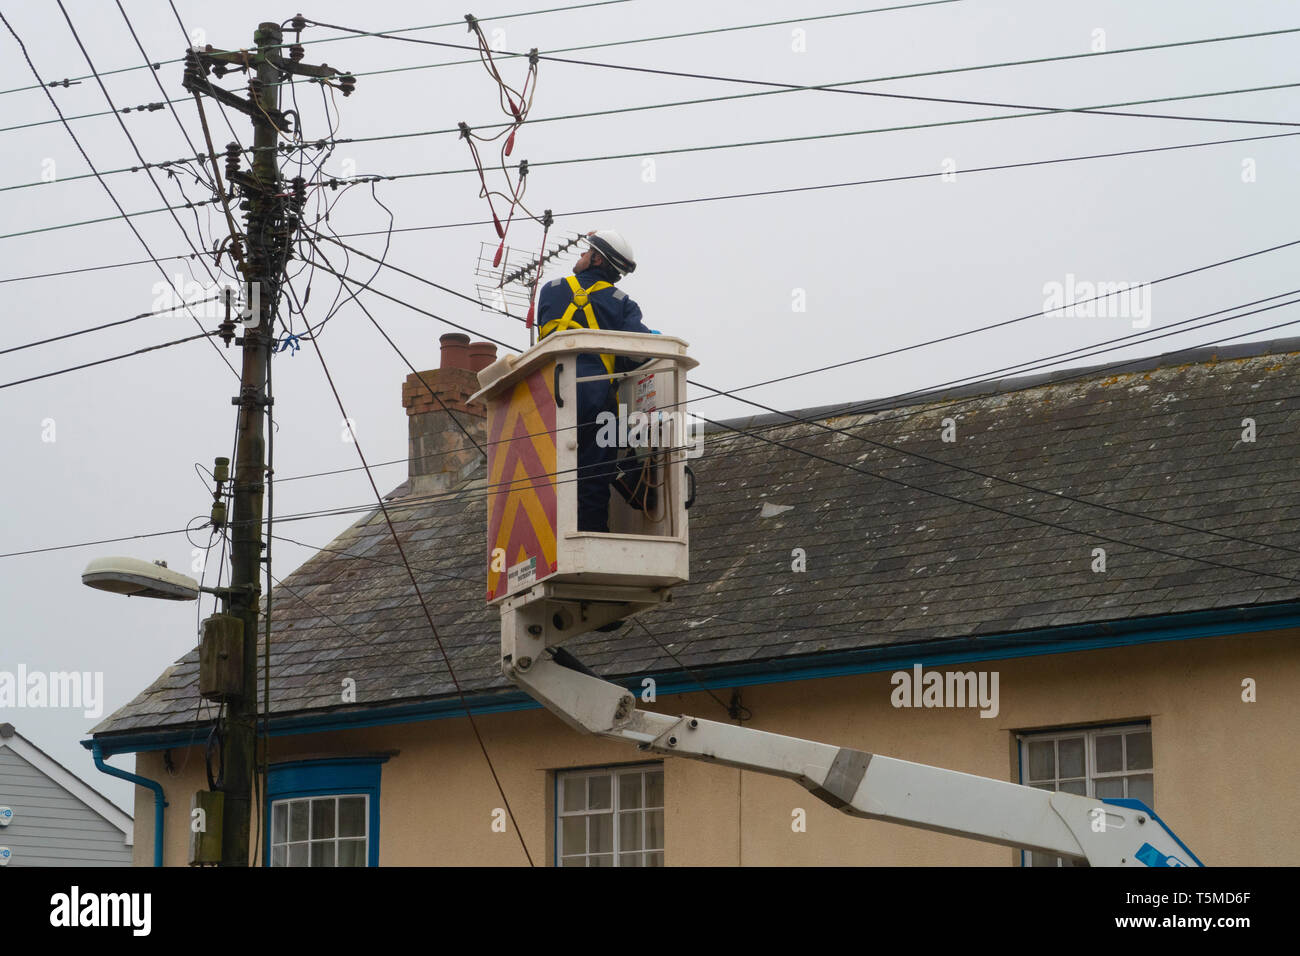 Workers for Western Power Distribution working to replace telegraph poles and electricity cables in Sidmouth, Devon, UK Stock Photo